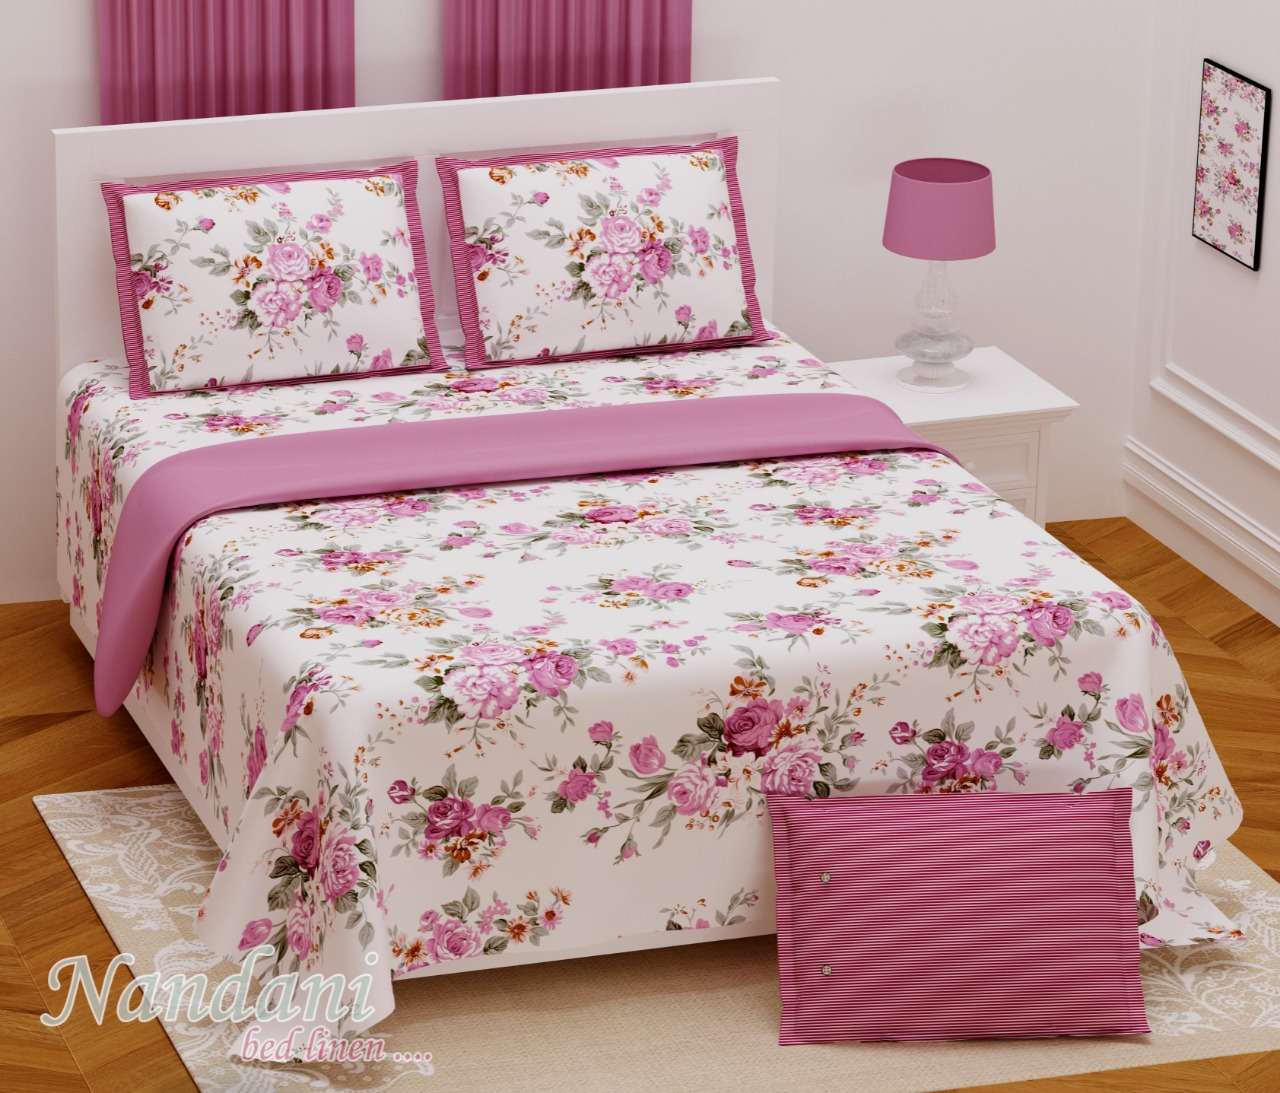 nandini king size 1 bedsheets with 2 pillow cover twill satin floral prints 